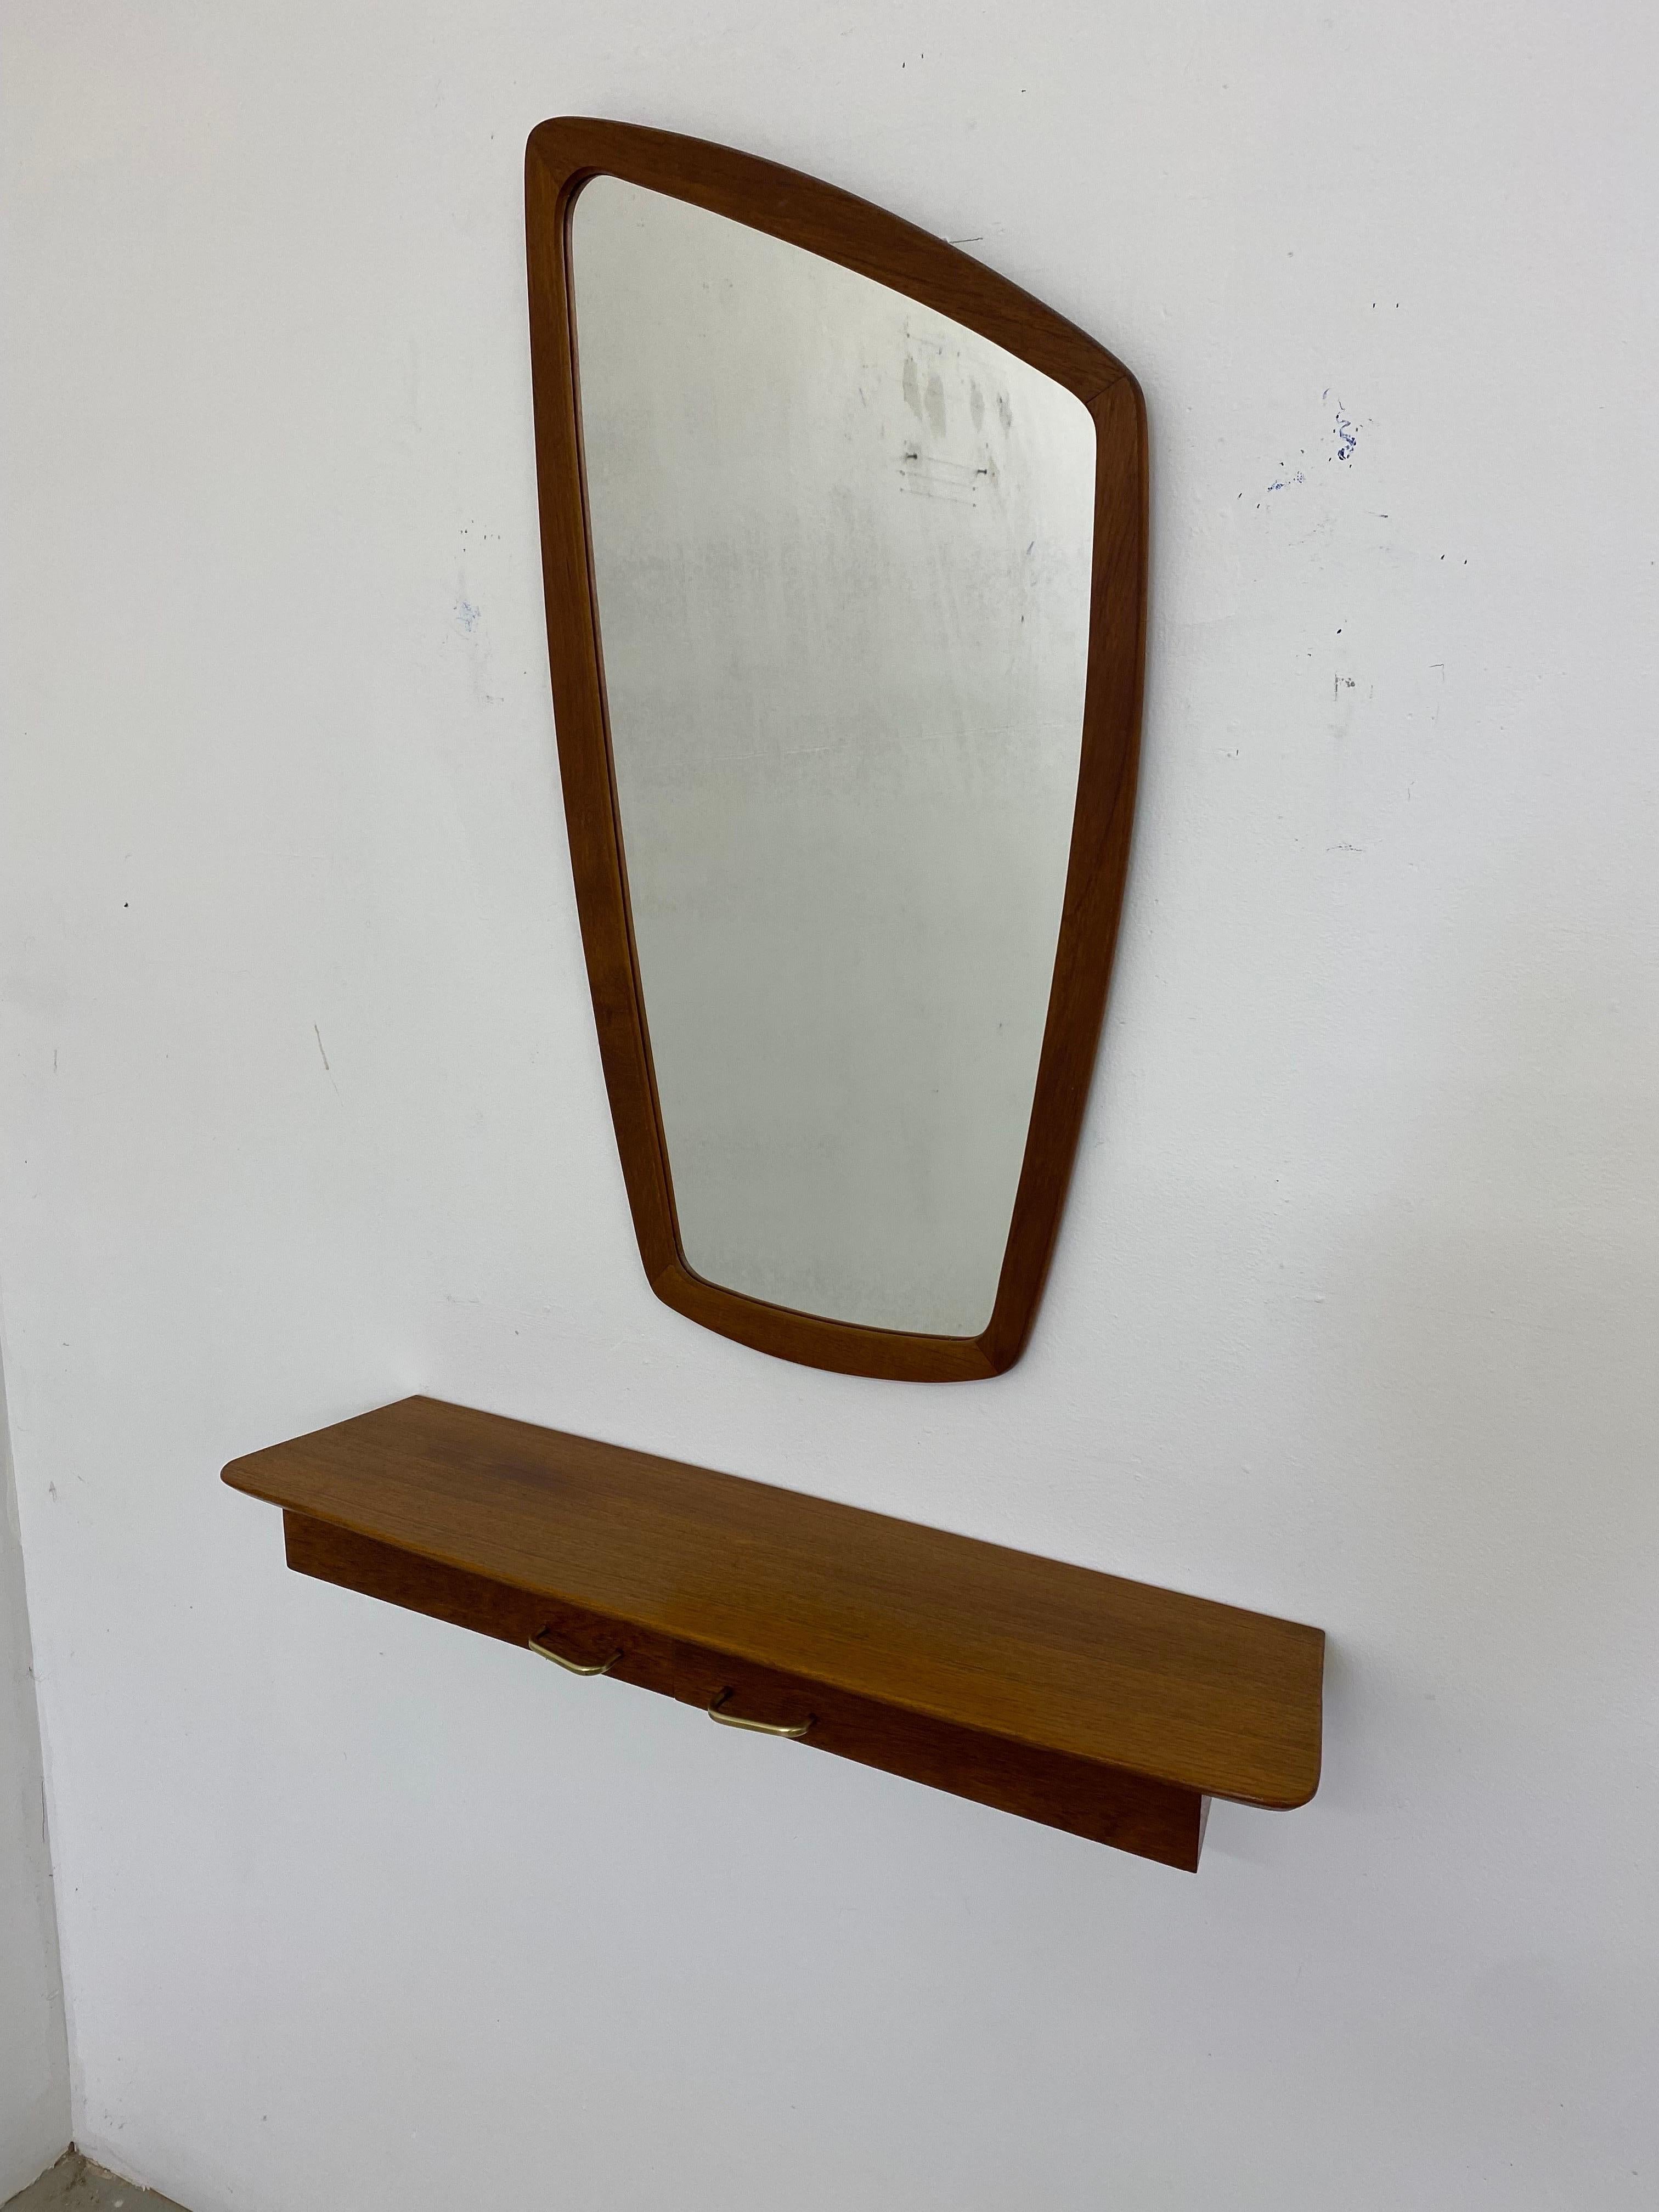 Pedersen and Hansen Mirror and Hanging Console.  Asymmetric Teak Mirror with a 2 drawer Console.  Drawers swing open for storage.  Perfect for keys and phone!  Label to back side of Mirror.  Have had many mirrors by this Danish Maker, but never this